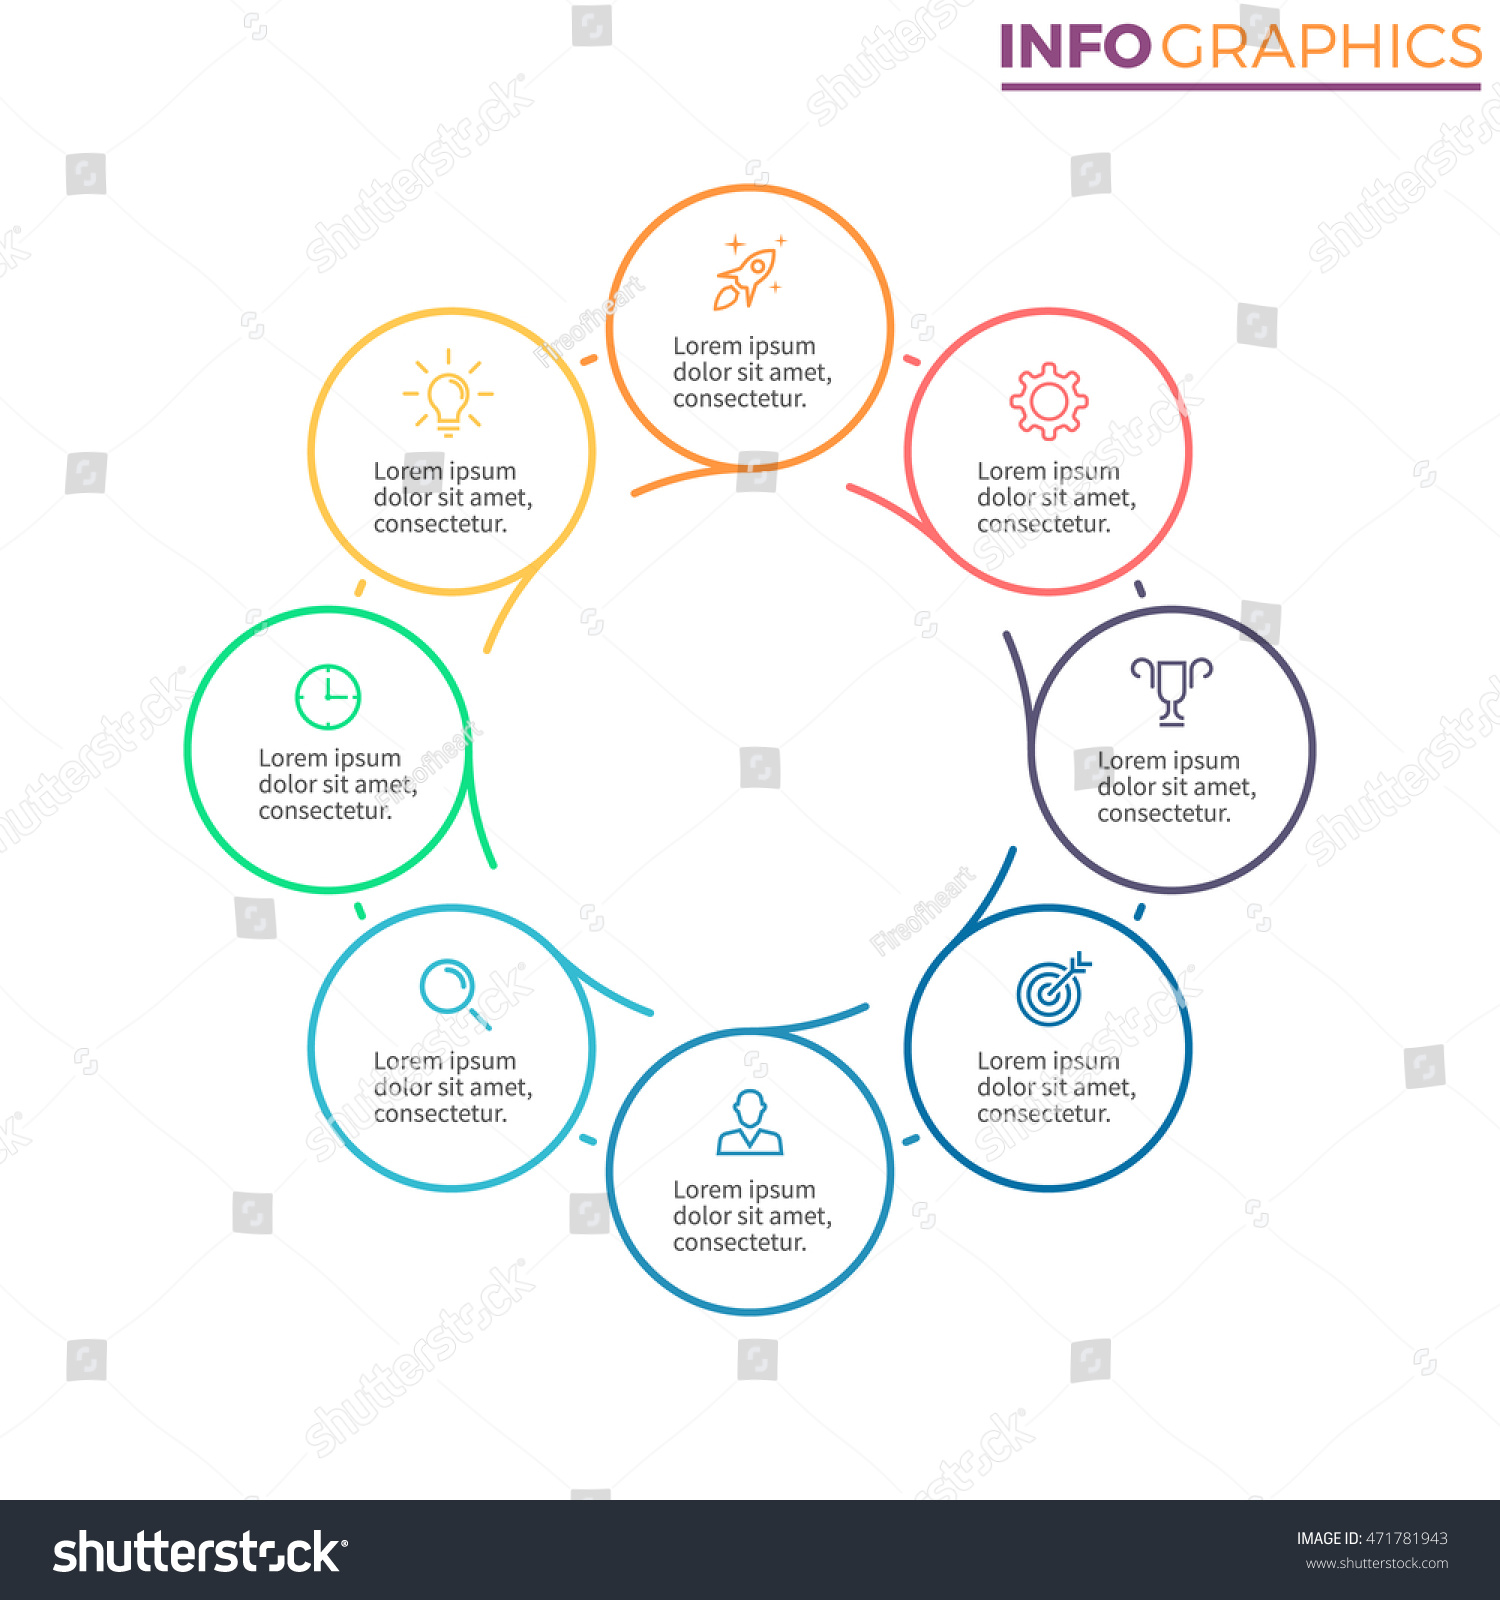 Outline Circular Infographic Minimalistic Diagram Chart Stock Vector ...